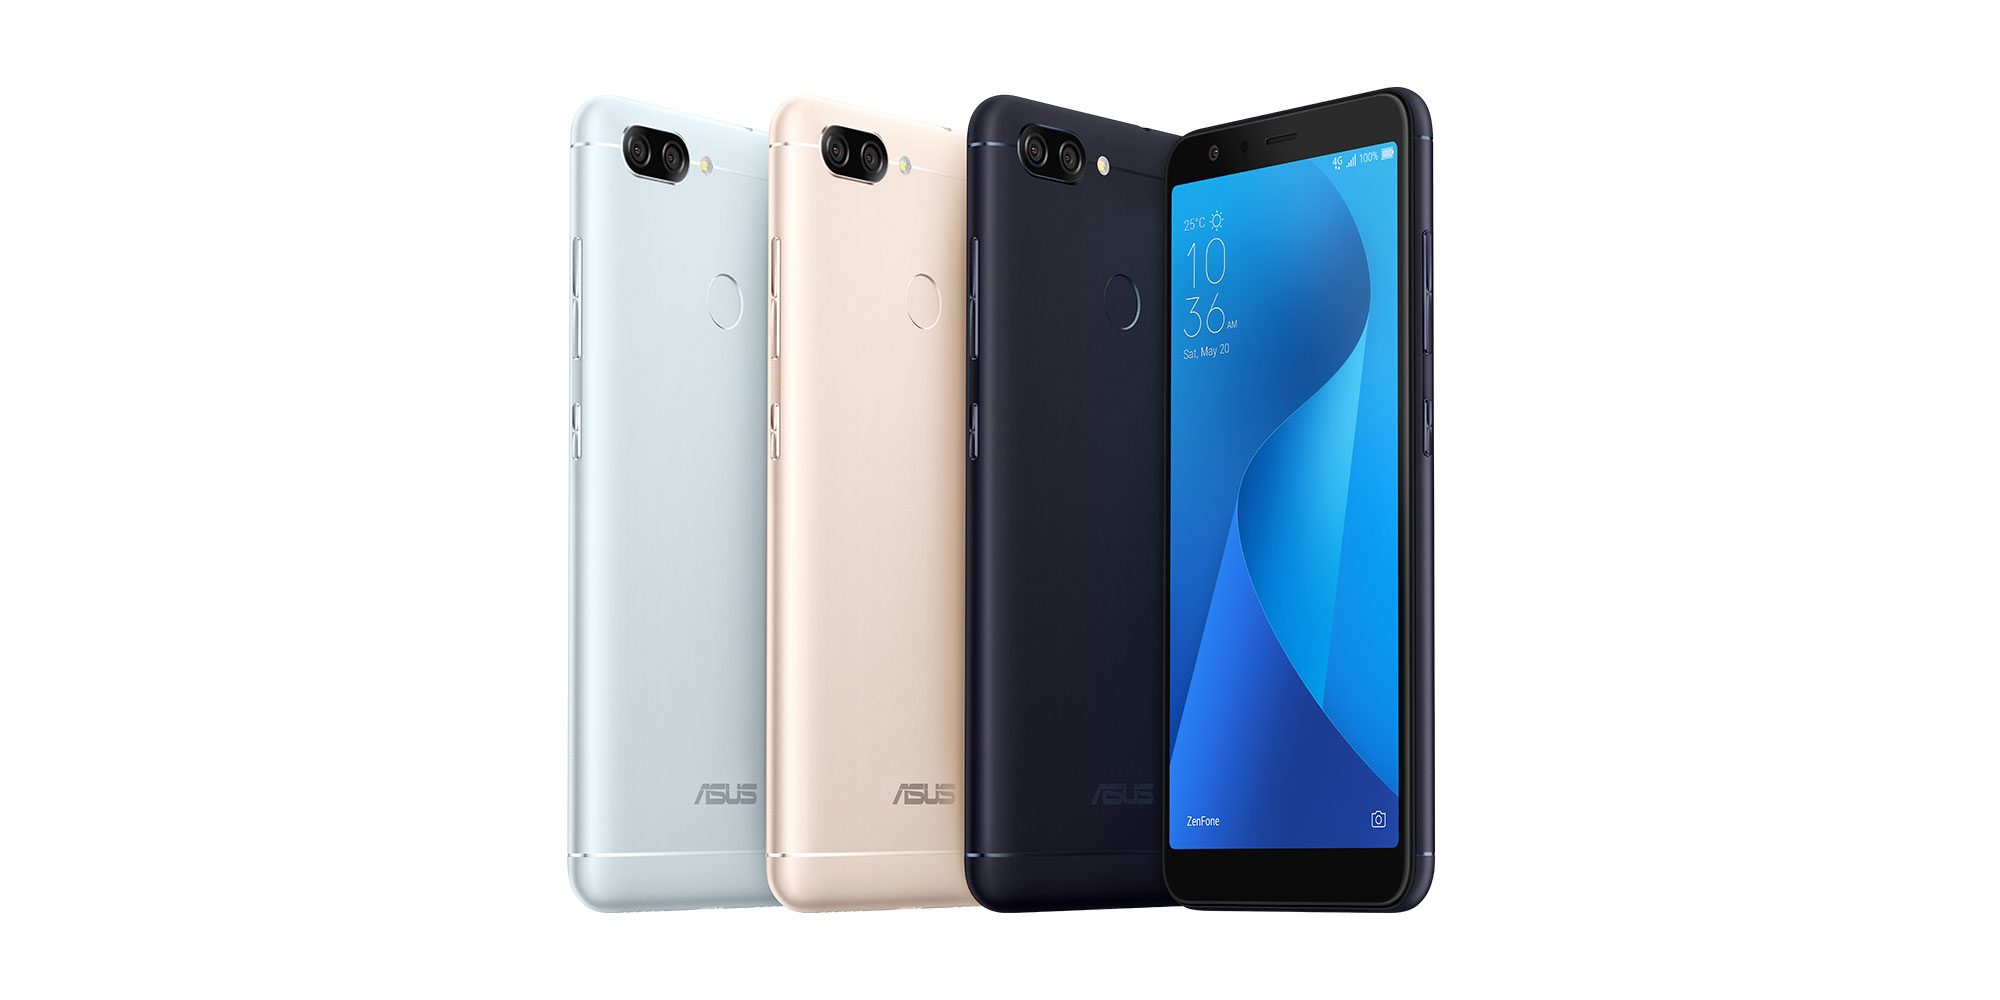 How To Fix Asus Zenfone Max Plus Not Charging [Troubleshooting Guide]